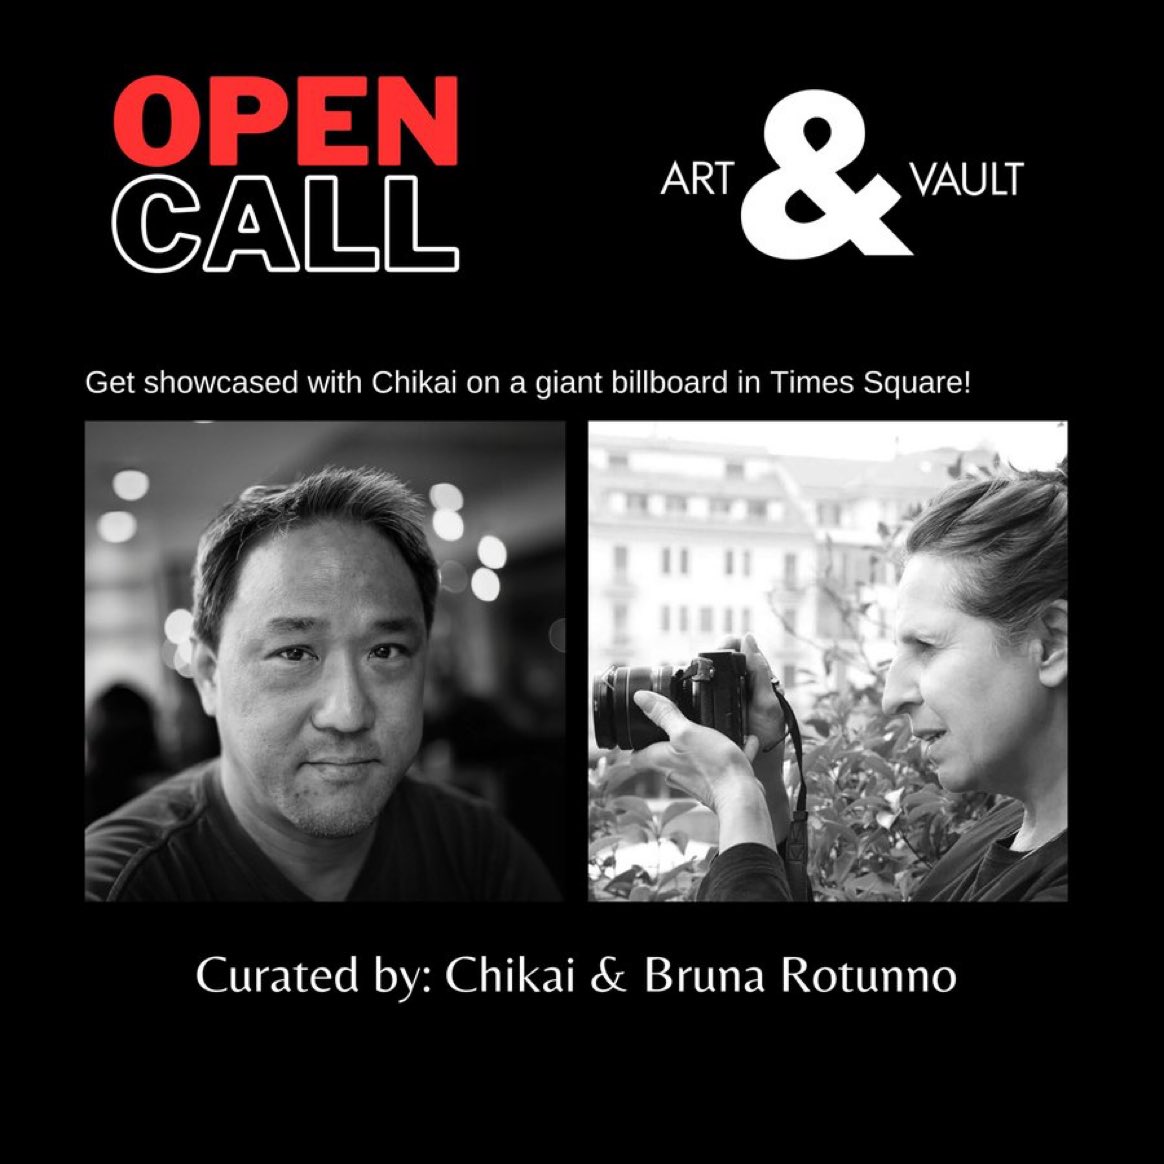 🔥 OPEN CALL 🔥 Showcase your art on a giant billboard in Times Square during #NFTNYC alongside the one & only Chikai! @lifeofc Curated by; Chikai & Bruna Rotunno @sider_alia ⏰ Deadline: April 2nd ⬇️ Details below.